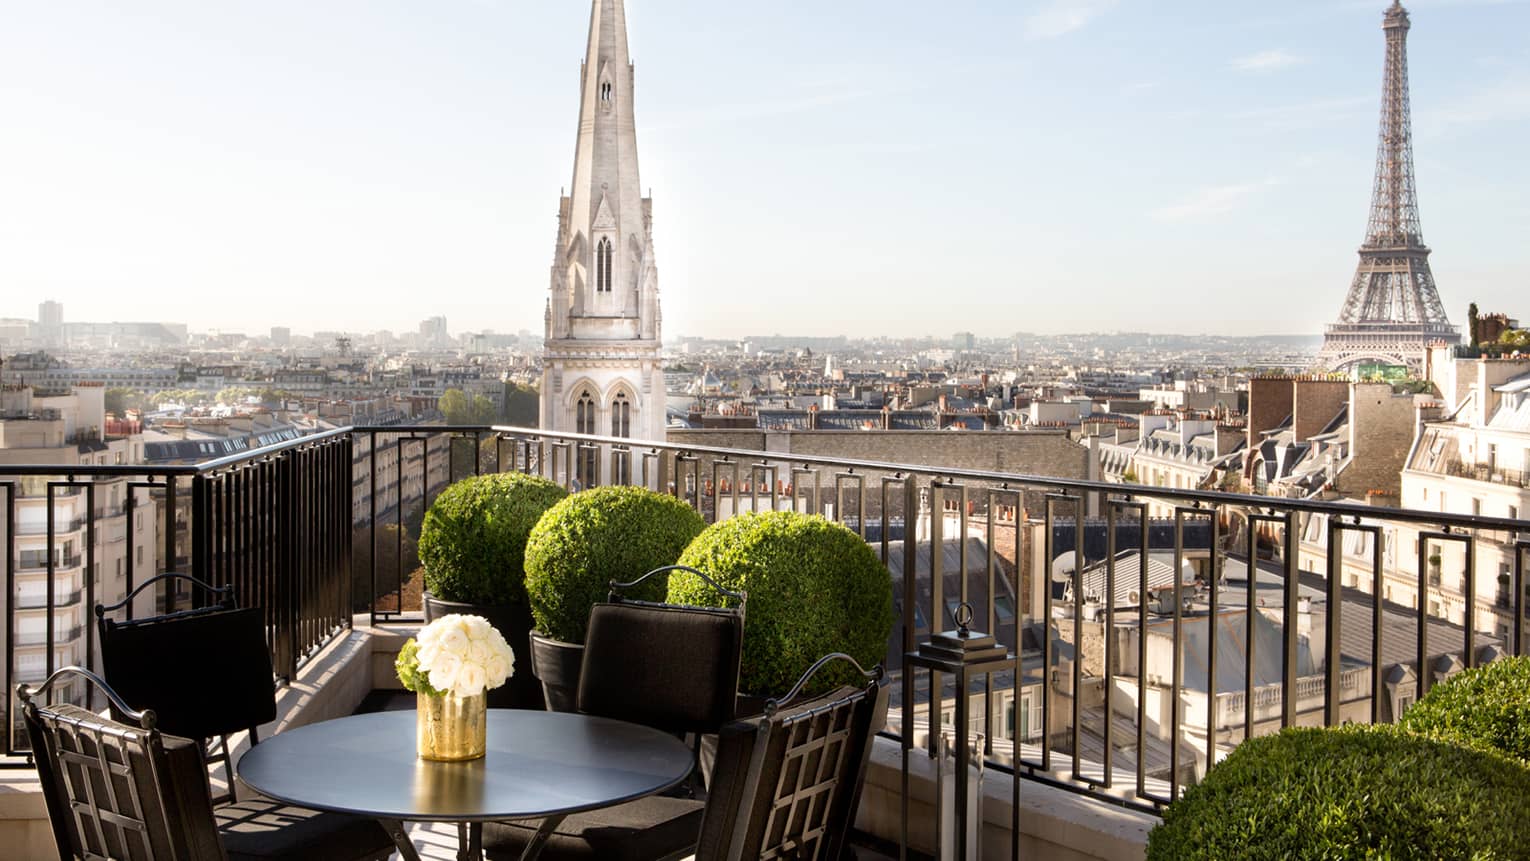 Patio dining table with white roses, potted shrubs iron balcony overlooking Paris rooftops, cathedrals